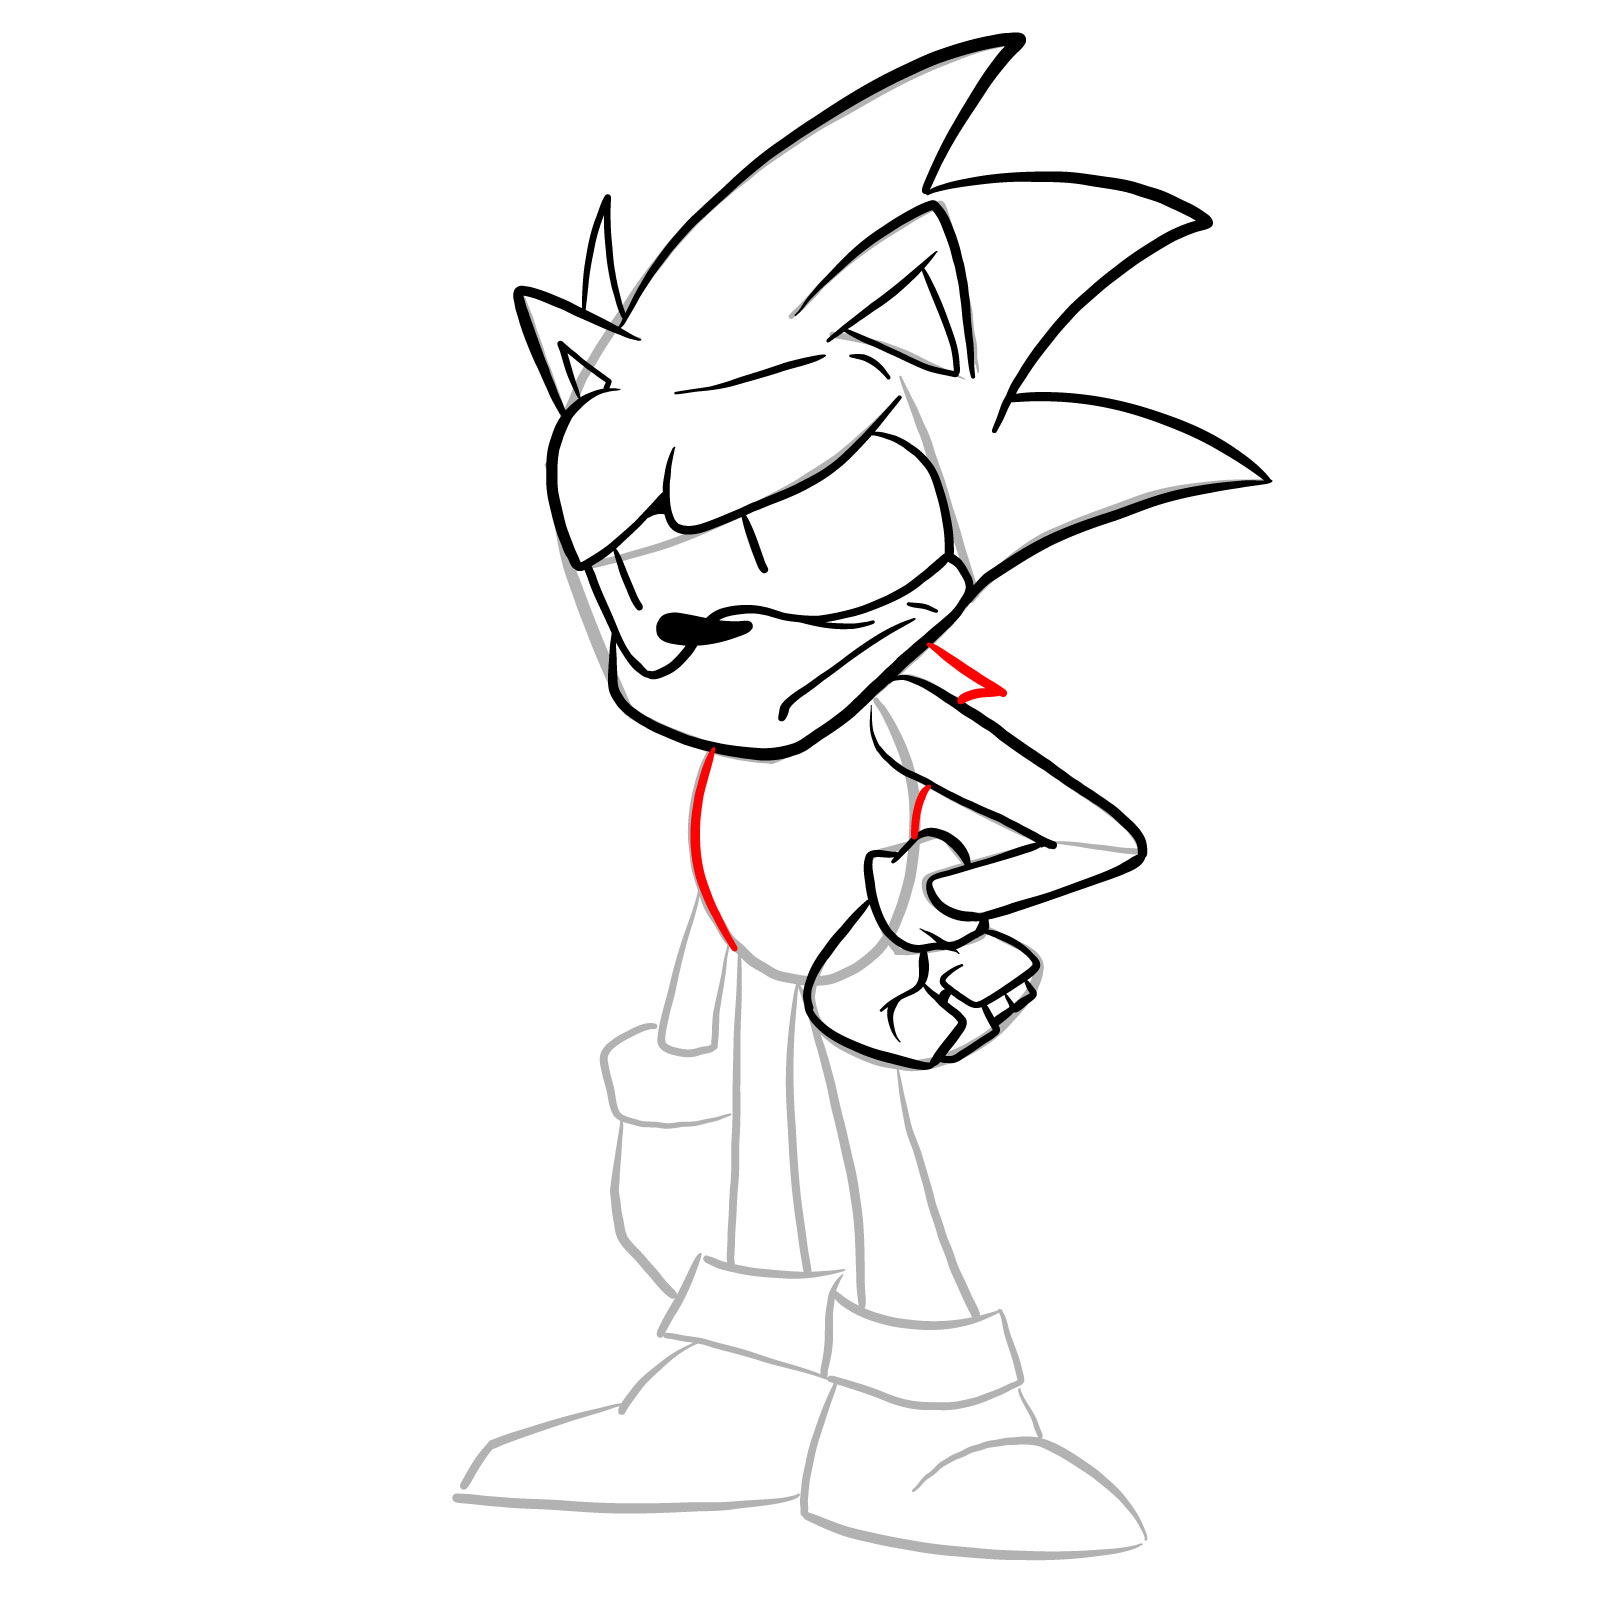 How to draw Sonic - FNF: Secret Histories - step 18